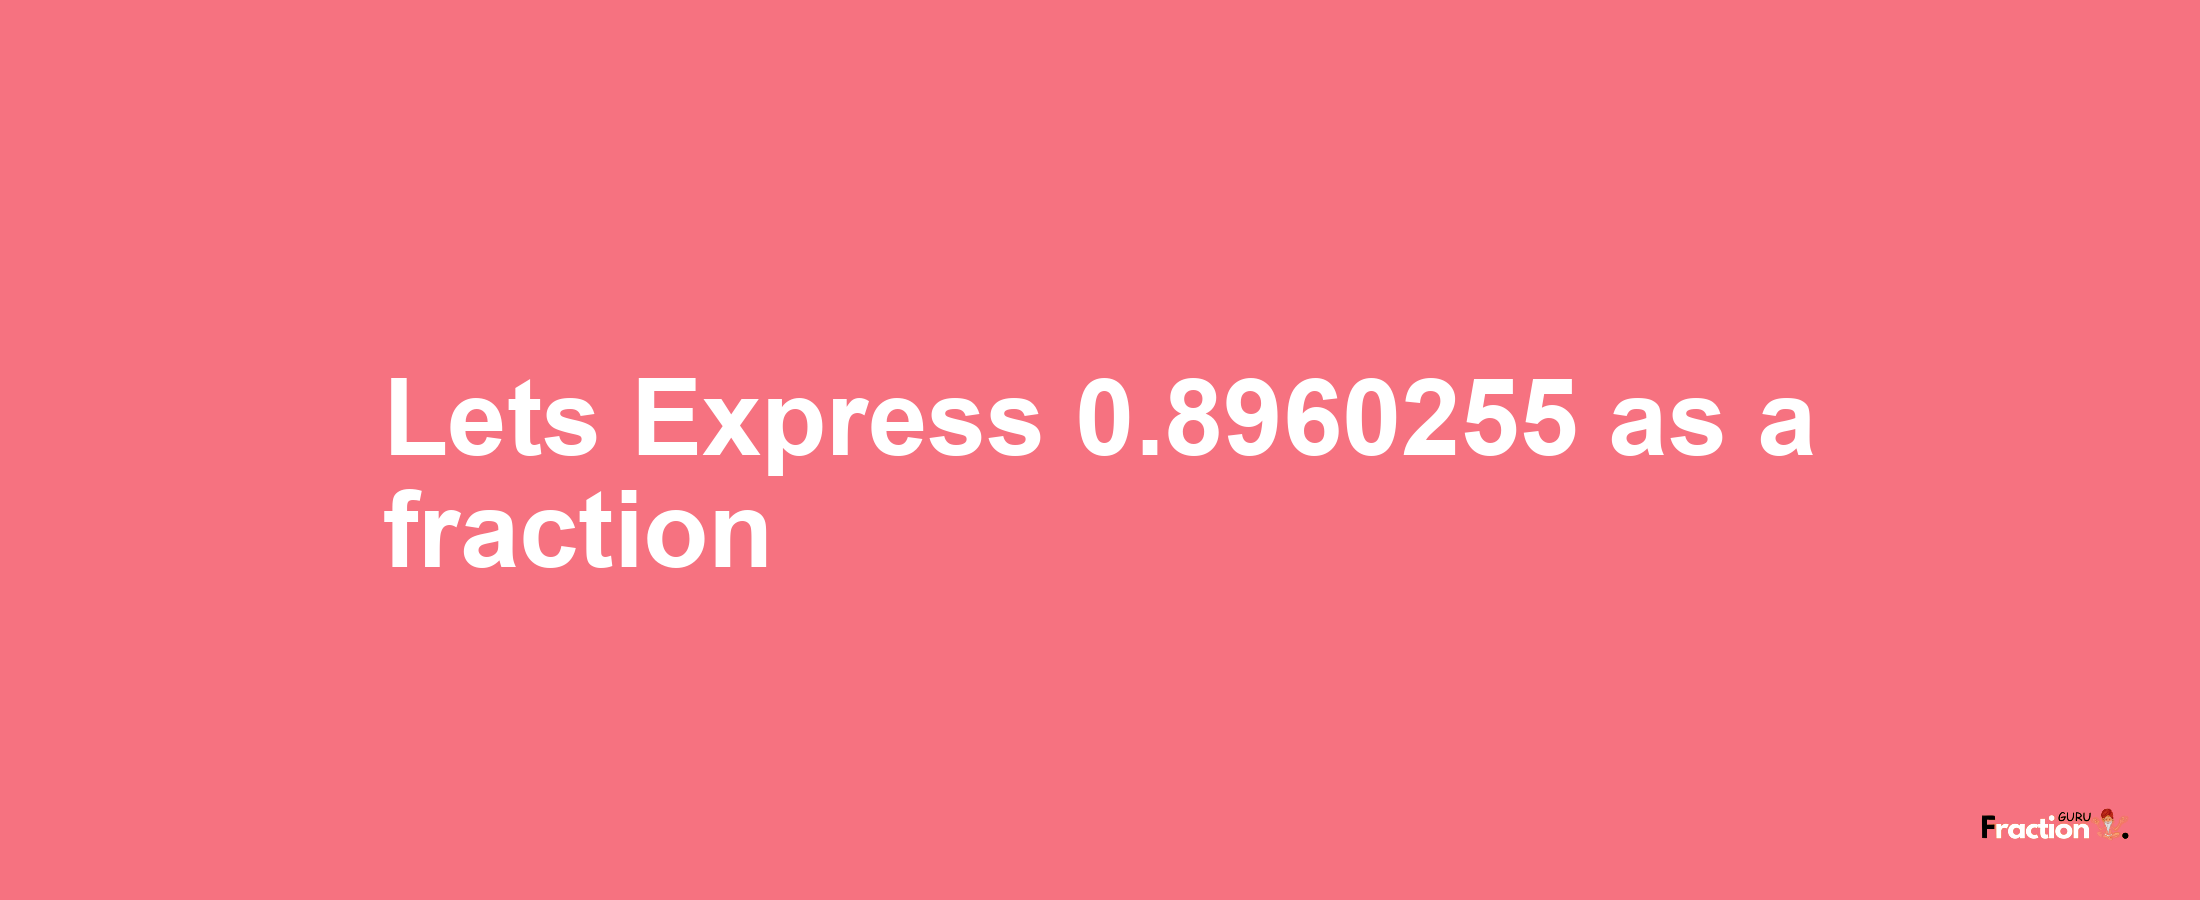 Lets Express 0.8960255 as afraction